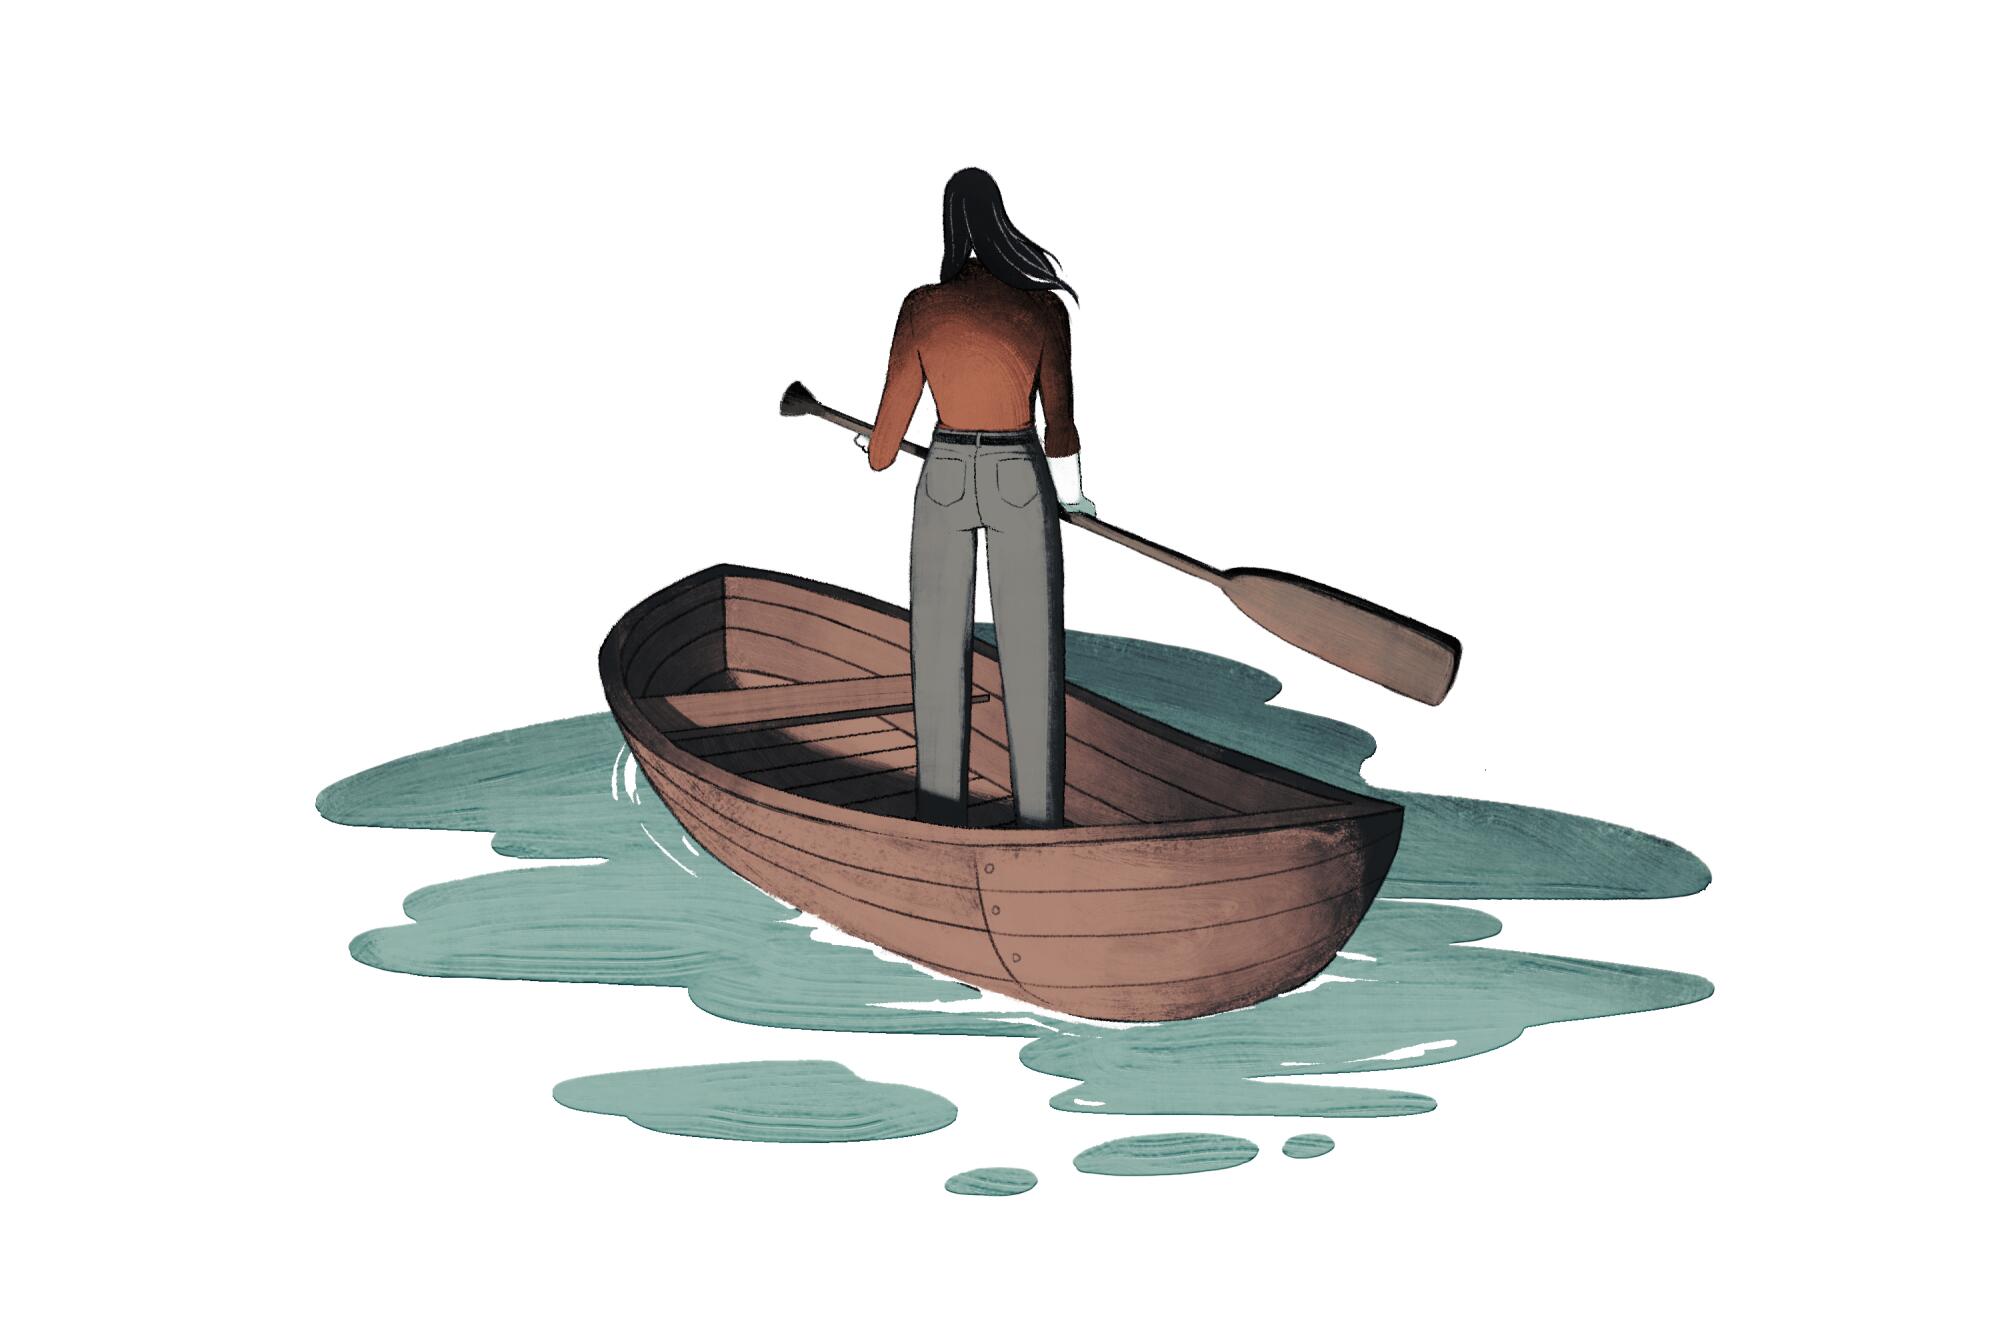 Illustration of a woman from behind, standing in boat holding an oar, looking out into white space